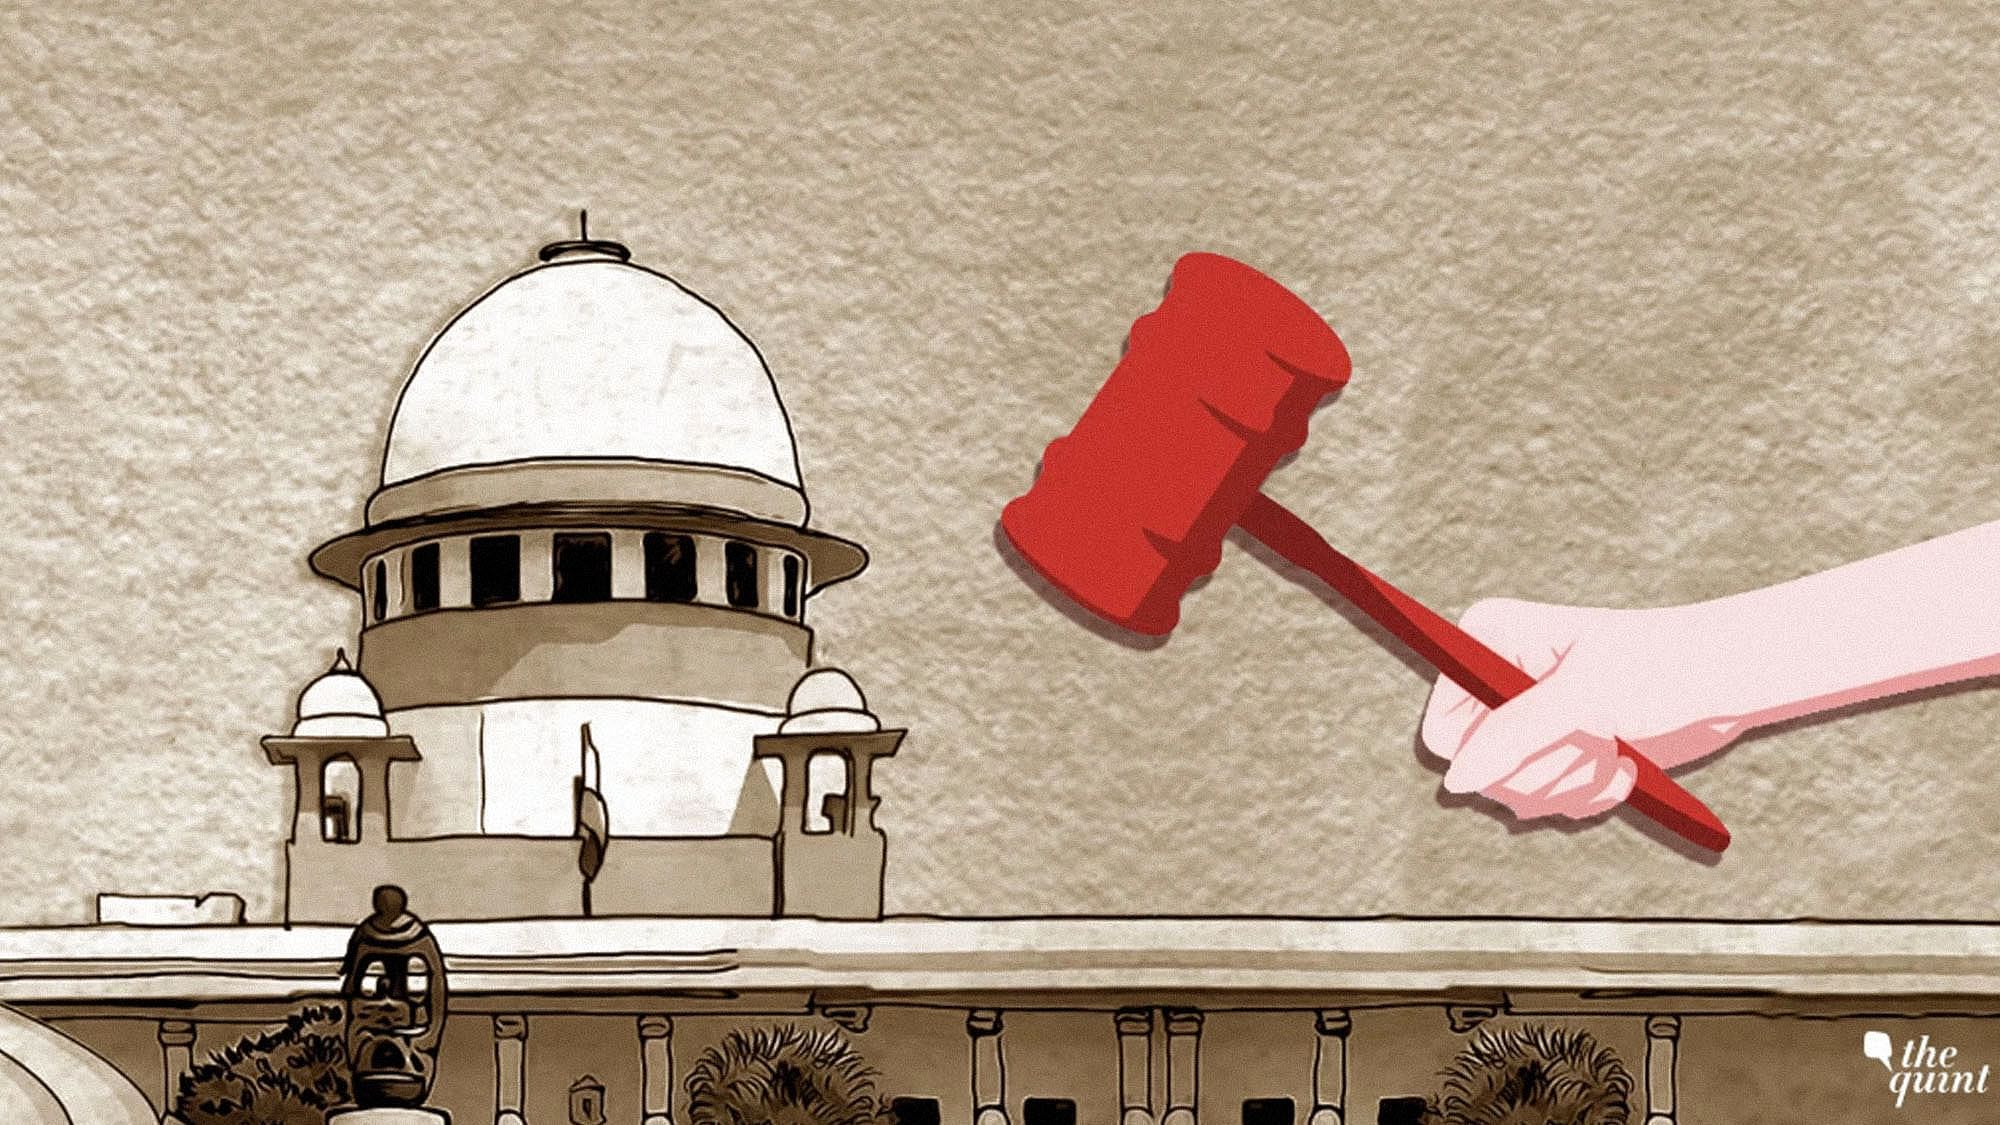 The image represents the Supreme Court of India.